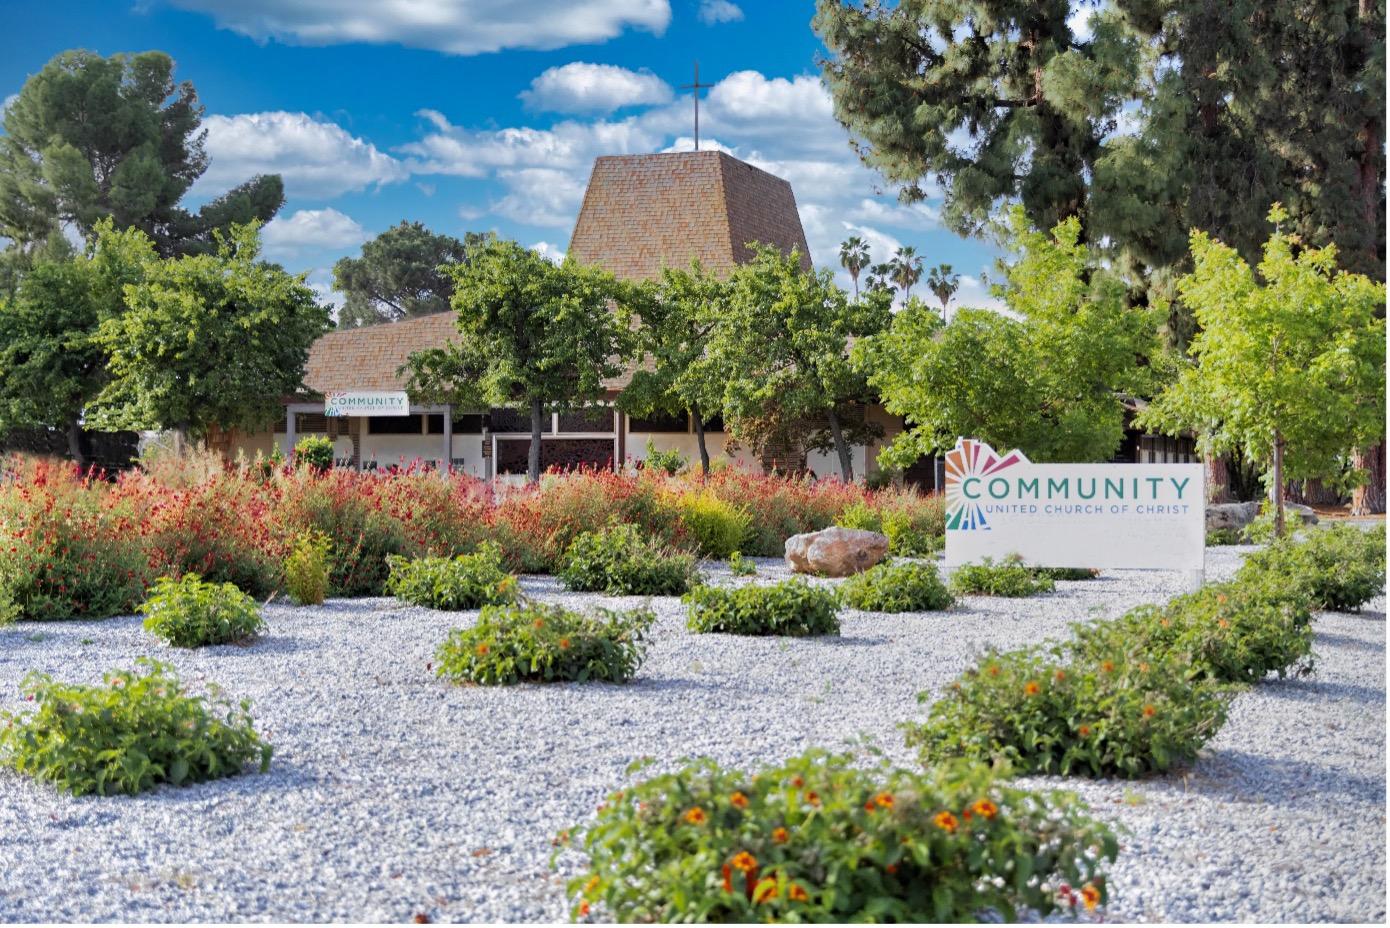 The church grounds of the Community United Church of Christ in Fresno, USA, 